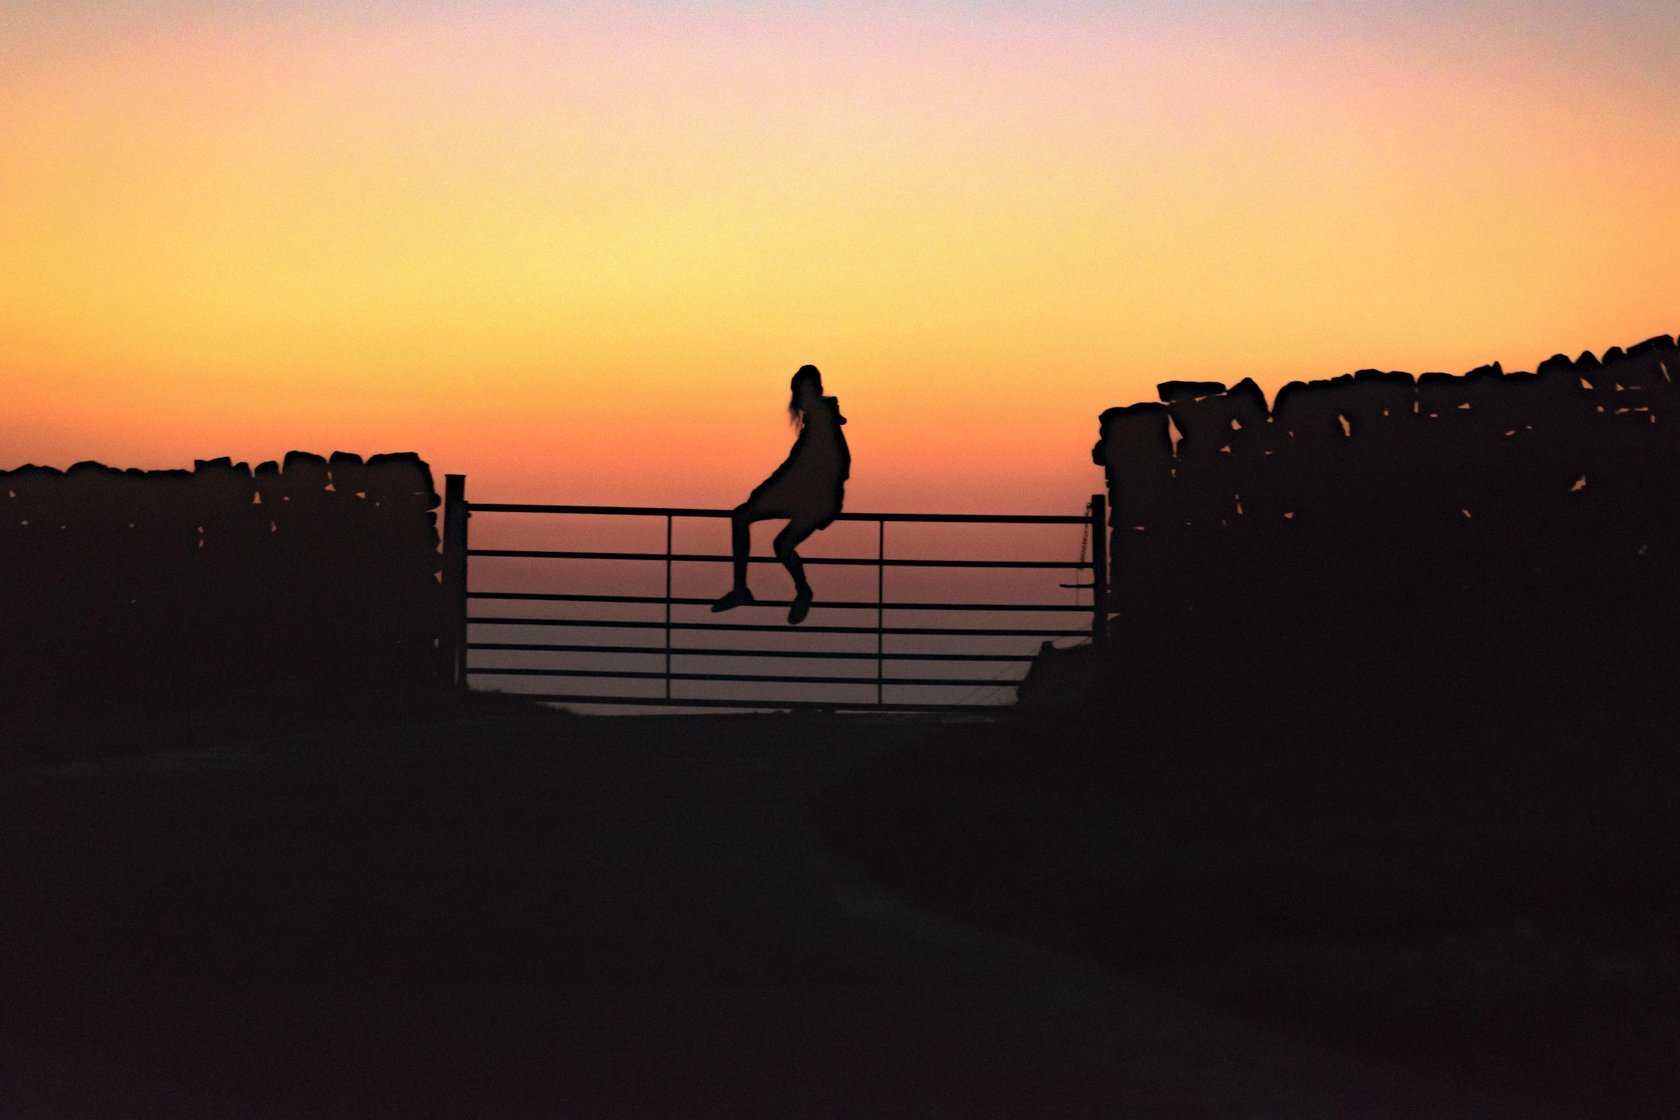 Silhouette Photography: The Art of Capturing Cool Silhouettes | Skylum Blog(6)